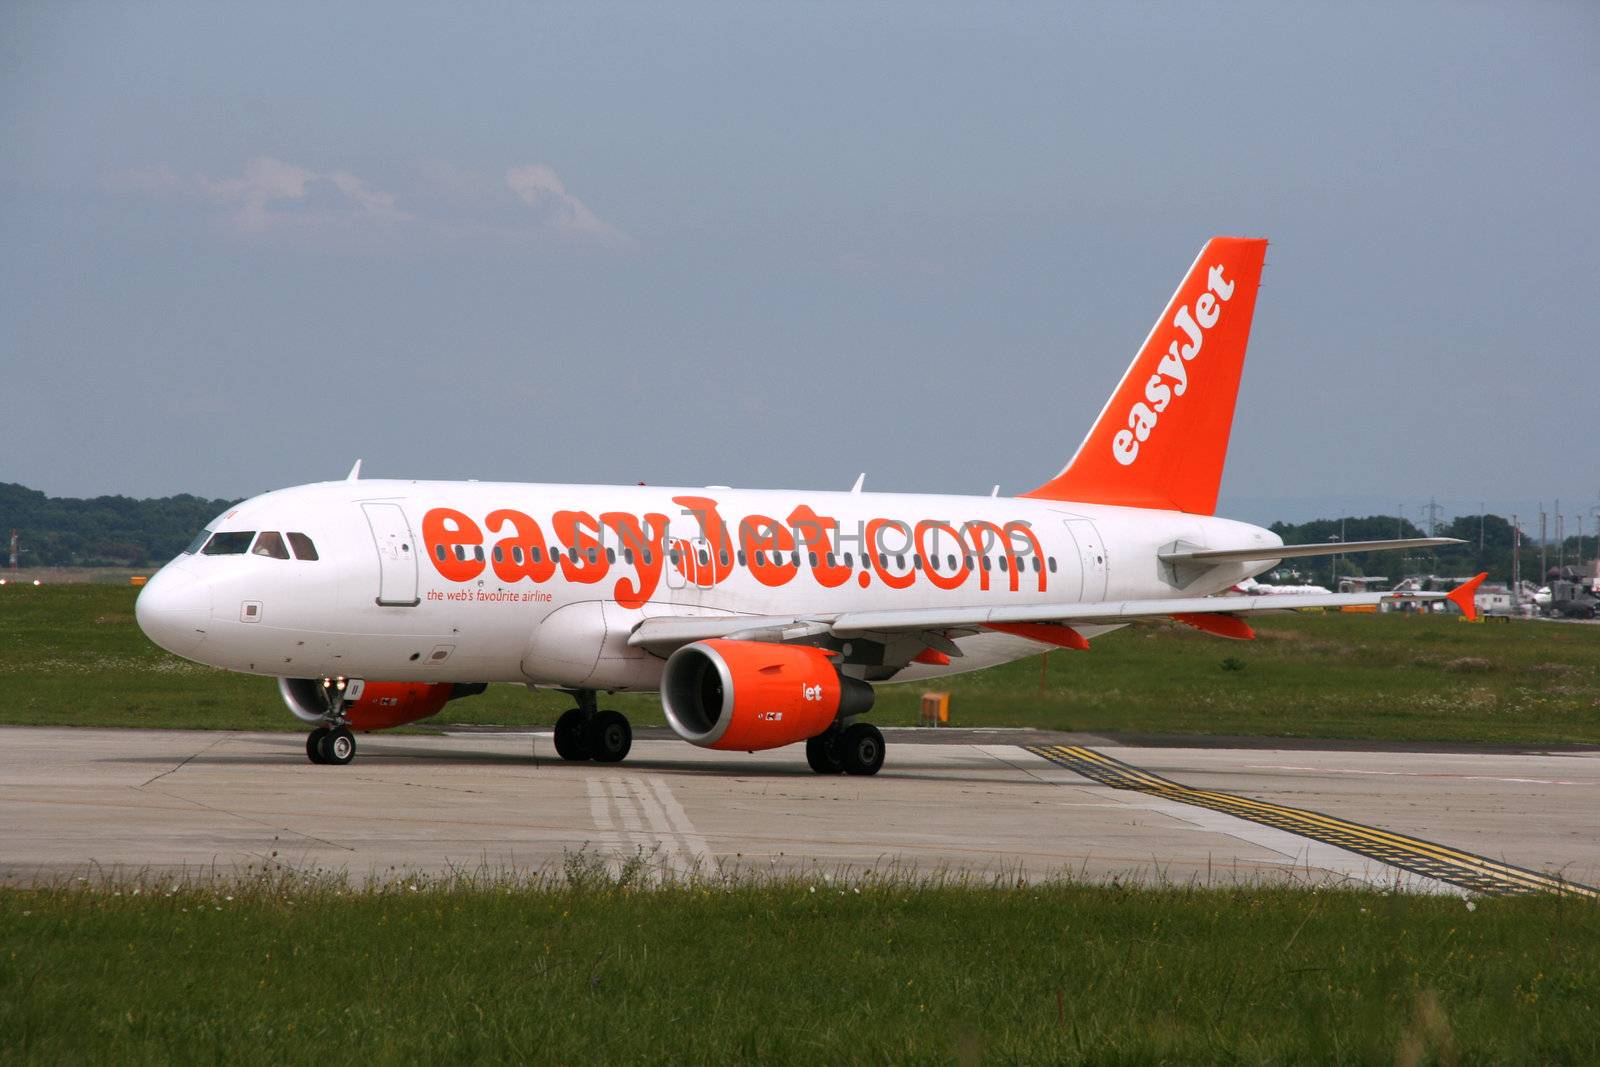 GENEVA, SWITZERLAND - 16 AUGUST 2008: Airbus A319 jet aircraft operated by easyJet at Geneva Cointrin International Airport on August 16, 2008. easyJet is the fourth biggest airline in the world in terms of international passengers carried.